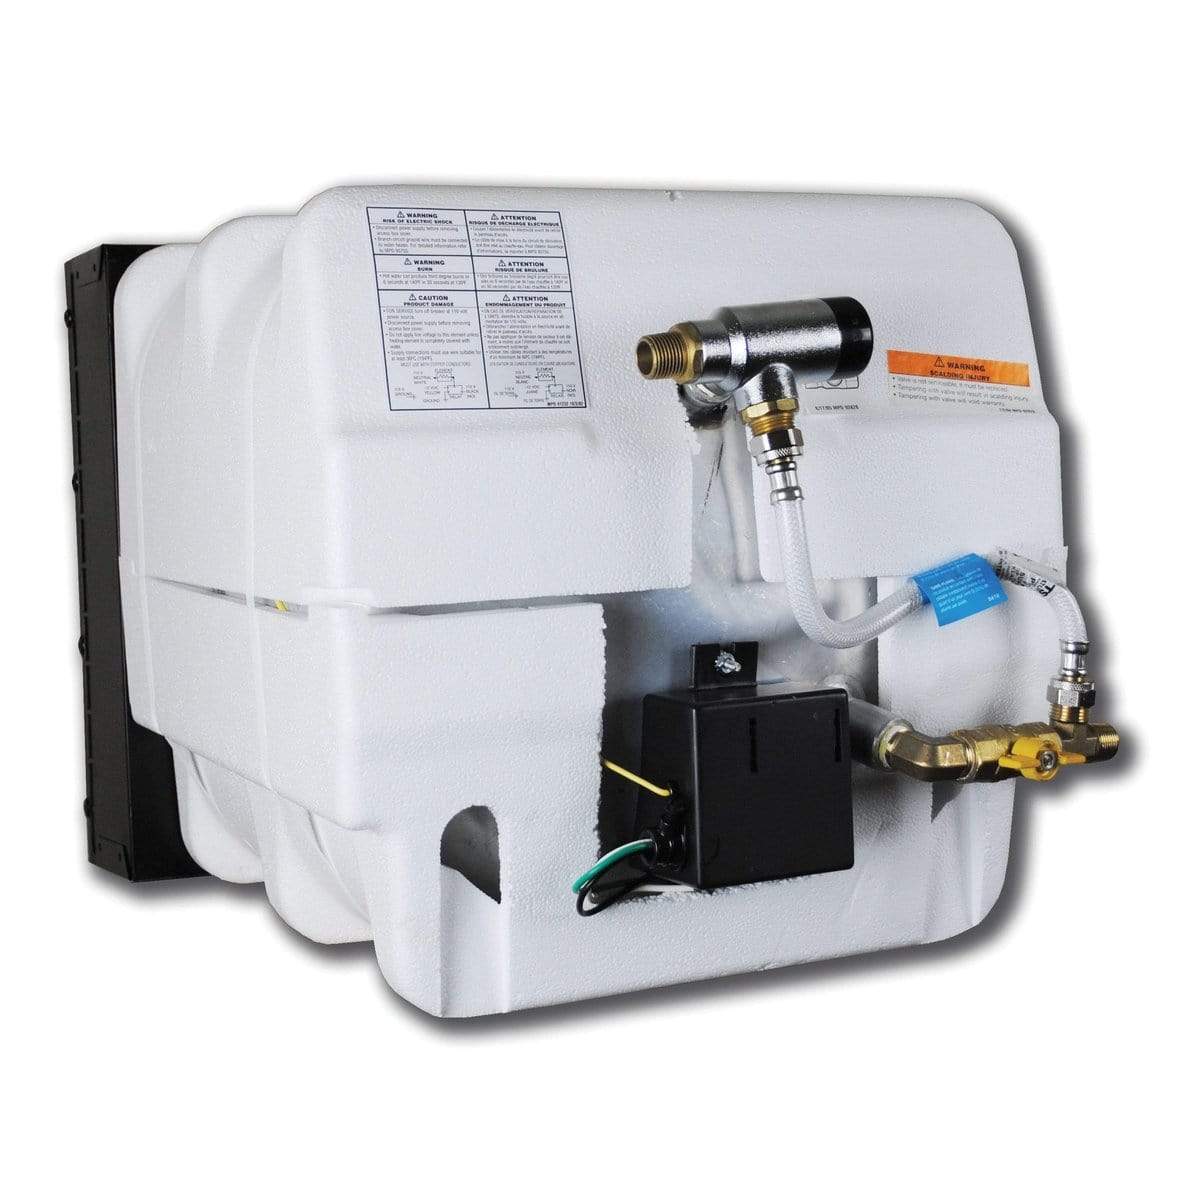 Atwood Mobile Products Not Qualified for Free Shipping Atwood XT Water Heater 10-Gallon LP/Electric #94026